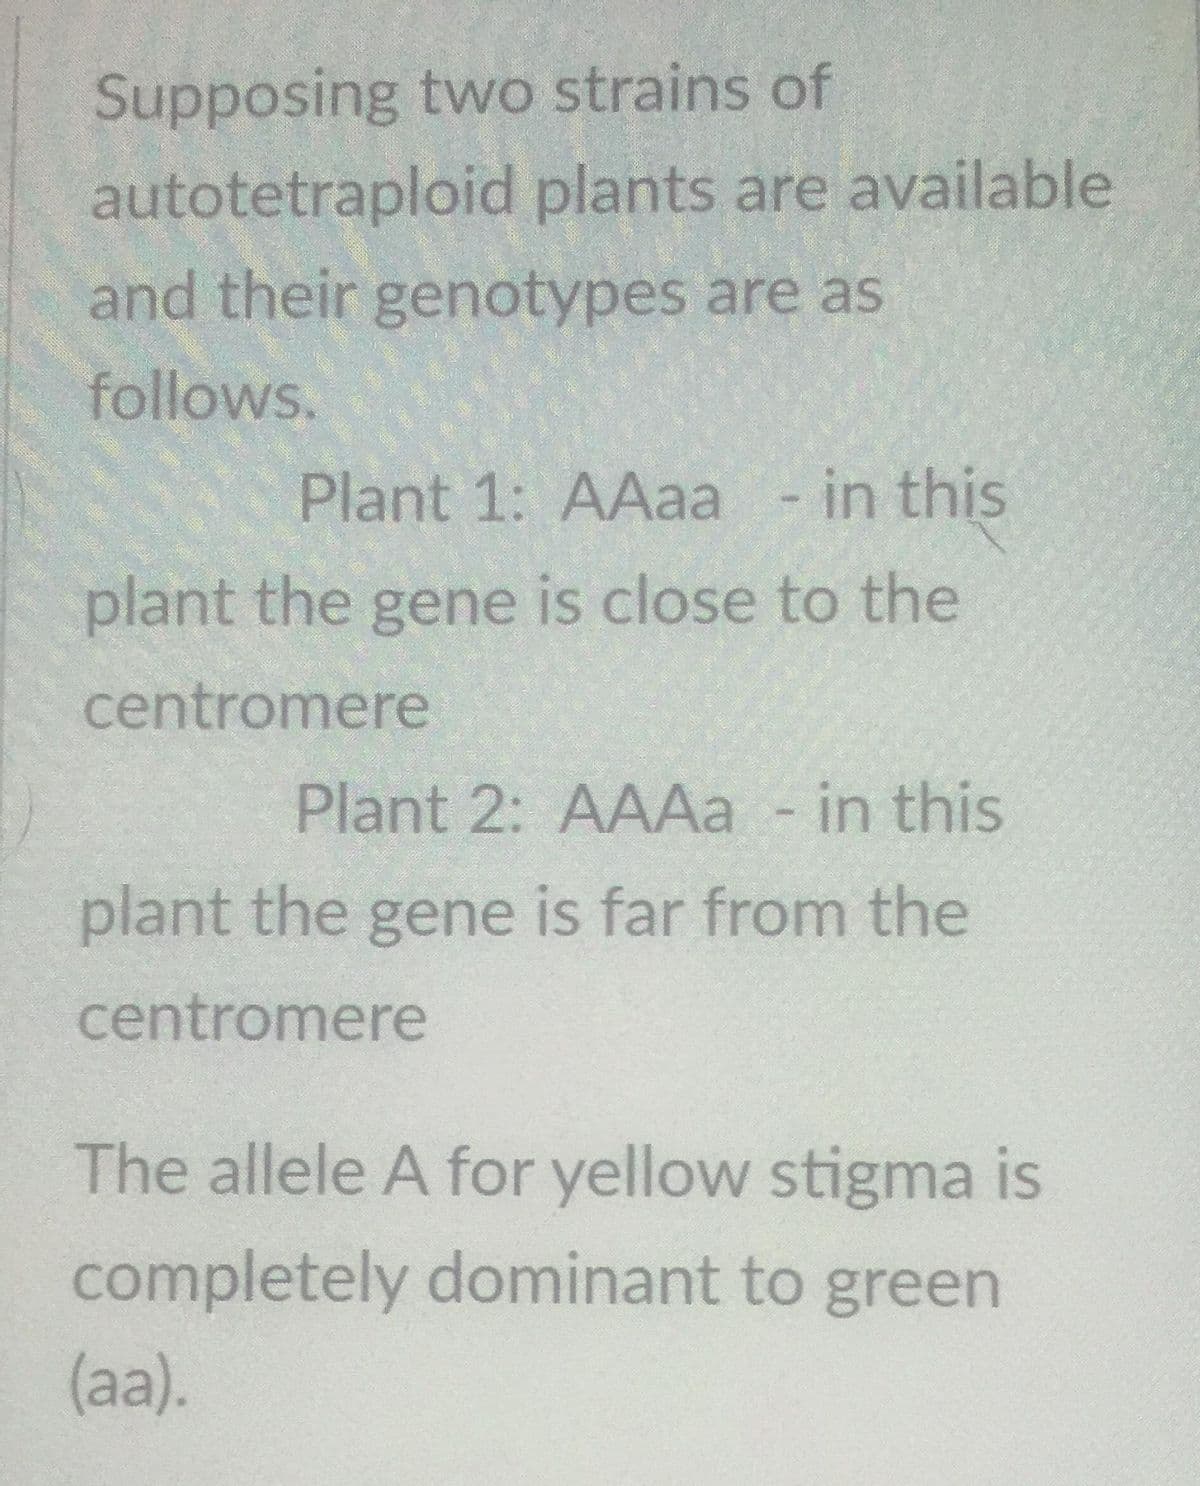 Supposing two strains of
autotetraploid plants are available
and their genotypes are as
follows.
Plant 1: AAaa - in this
plant the gene is close to the
centromere
Plant 2: AAAa - in this
plant the gene is far from the
centromere
The allele A for yellow stigma is
completely dominant to green
(aa).